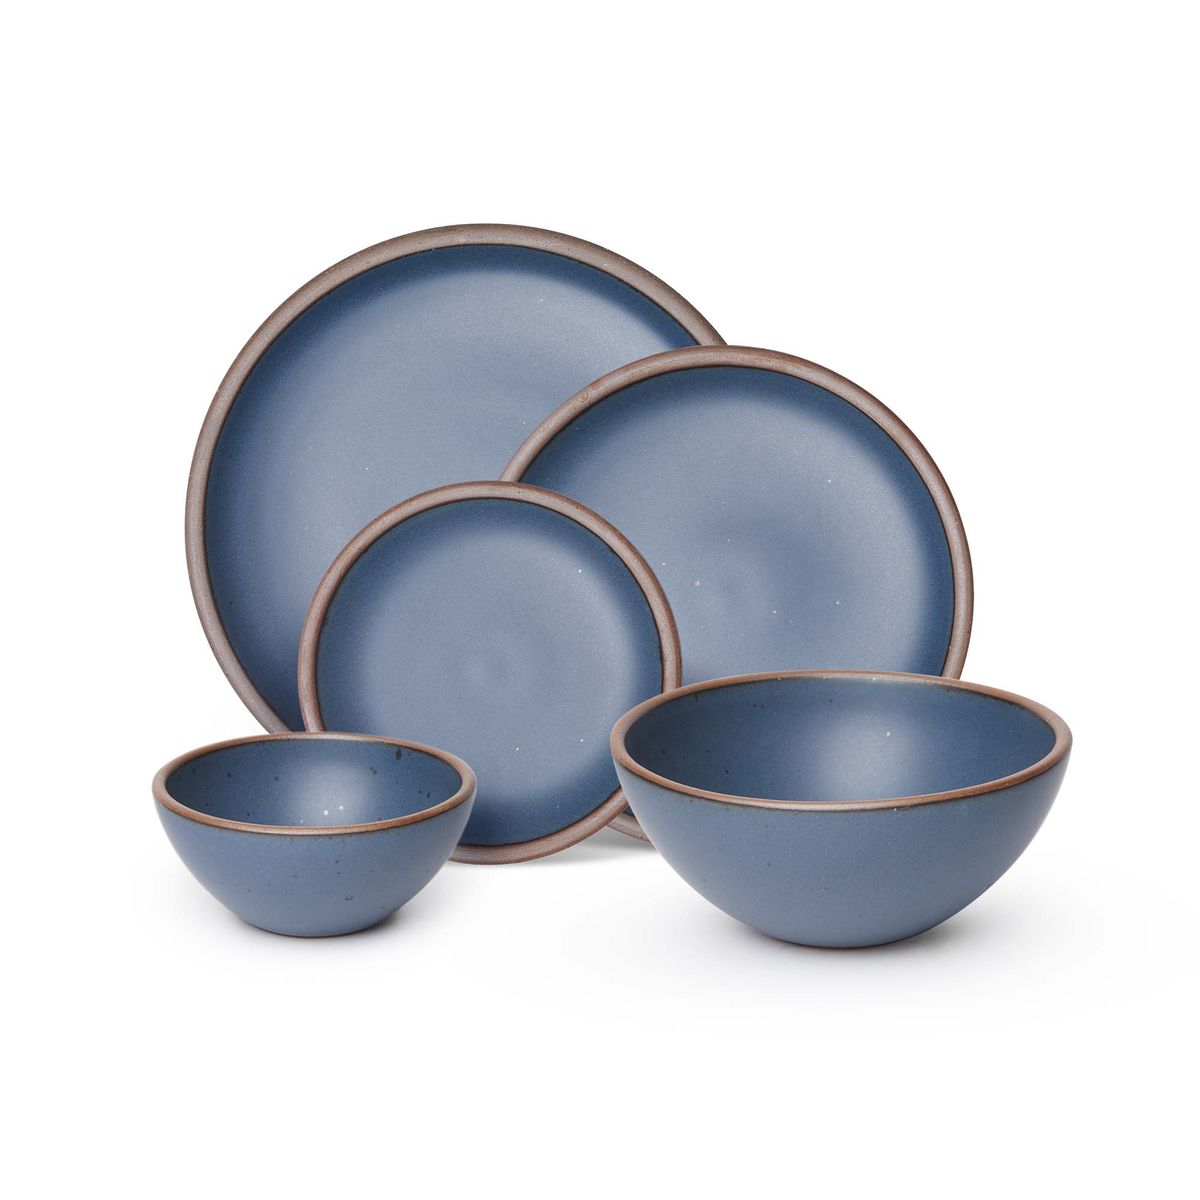 An ice cream bowl, soup bowl, cake plate, side plate and dinner plate paired together in a toned-down navy featuring iron speckles